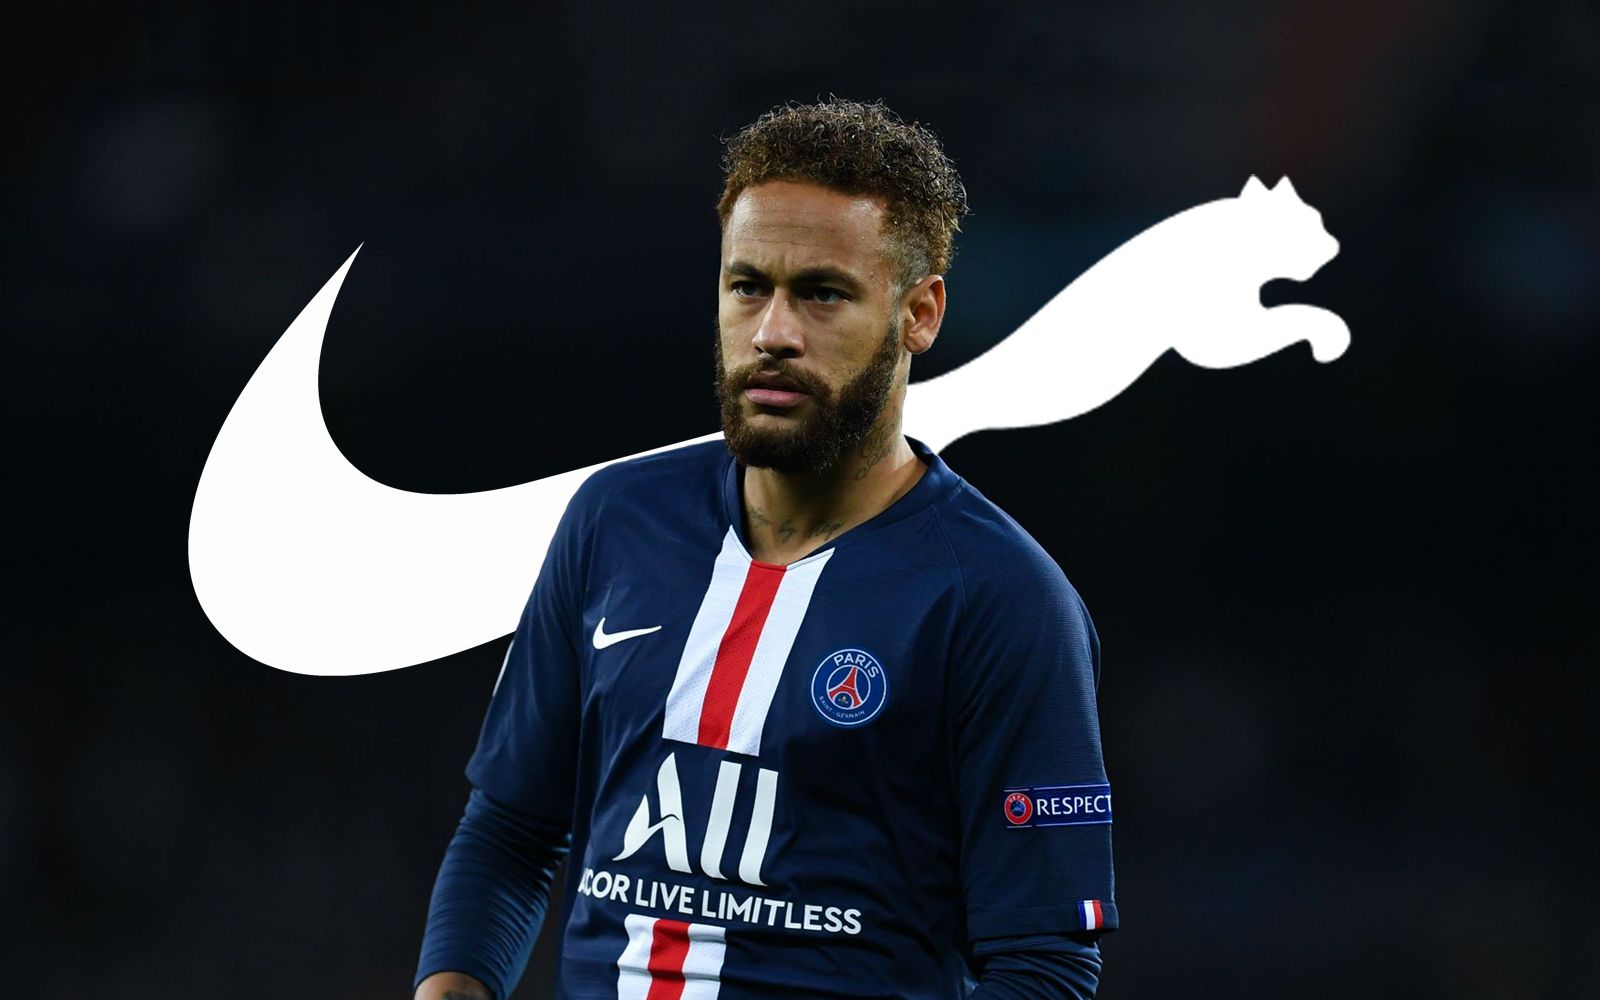 Why did Neymar decide to leave Nike?